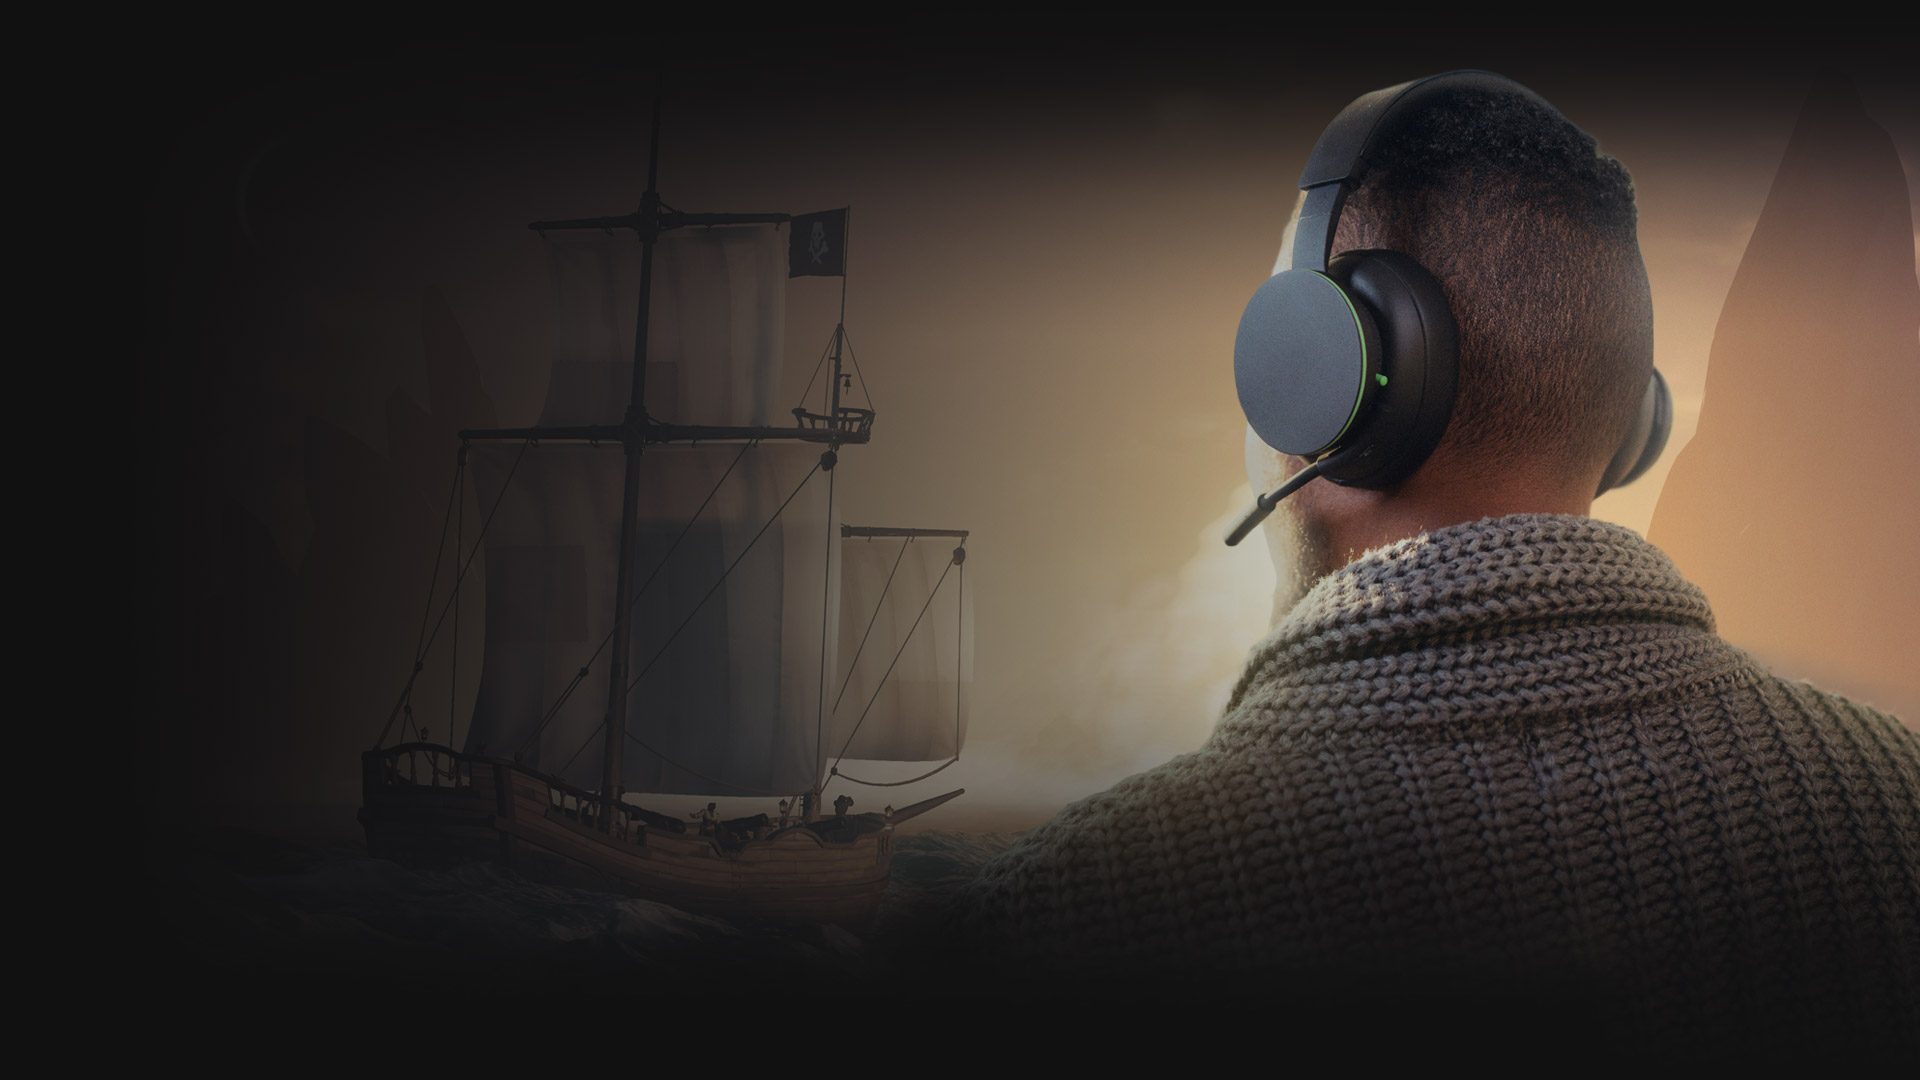 A man looks out over the vast Sea of Thieves, with the Xbox Wireless Headset keeping his communication with his crewmates clear.